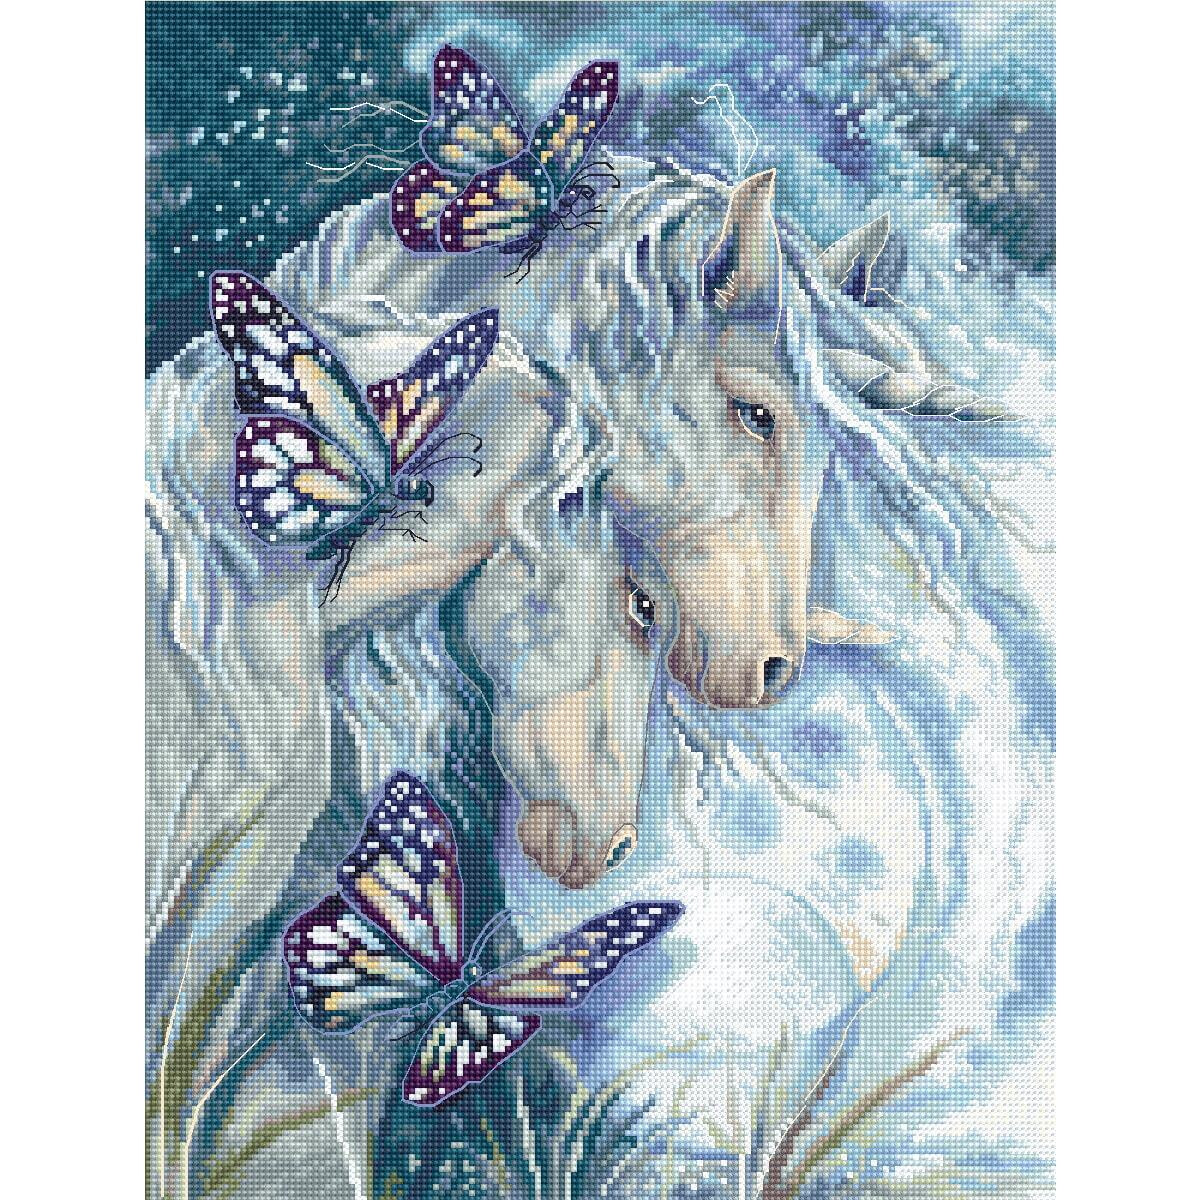 A vibrant, mystical scene with two unicorns with flowing...